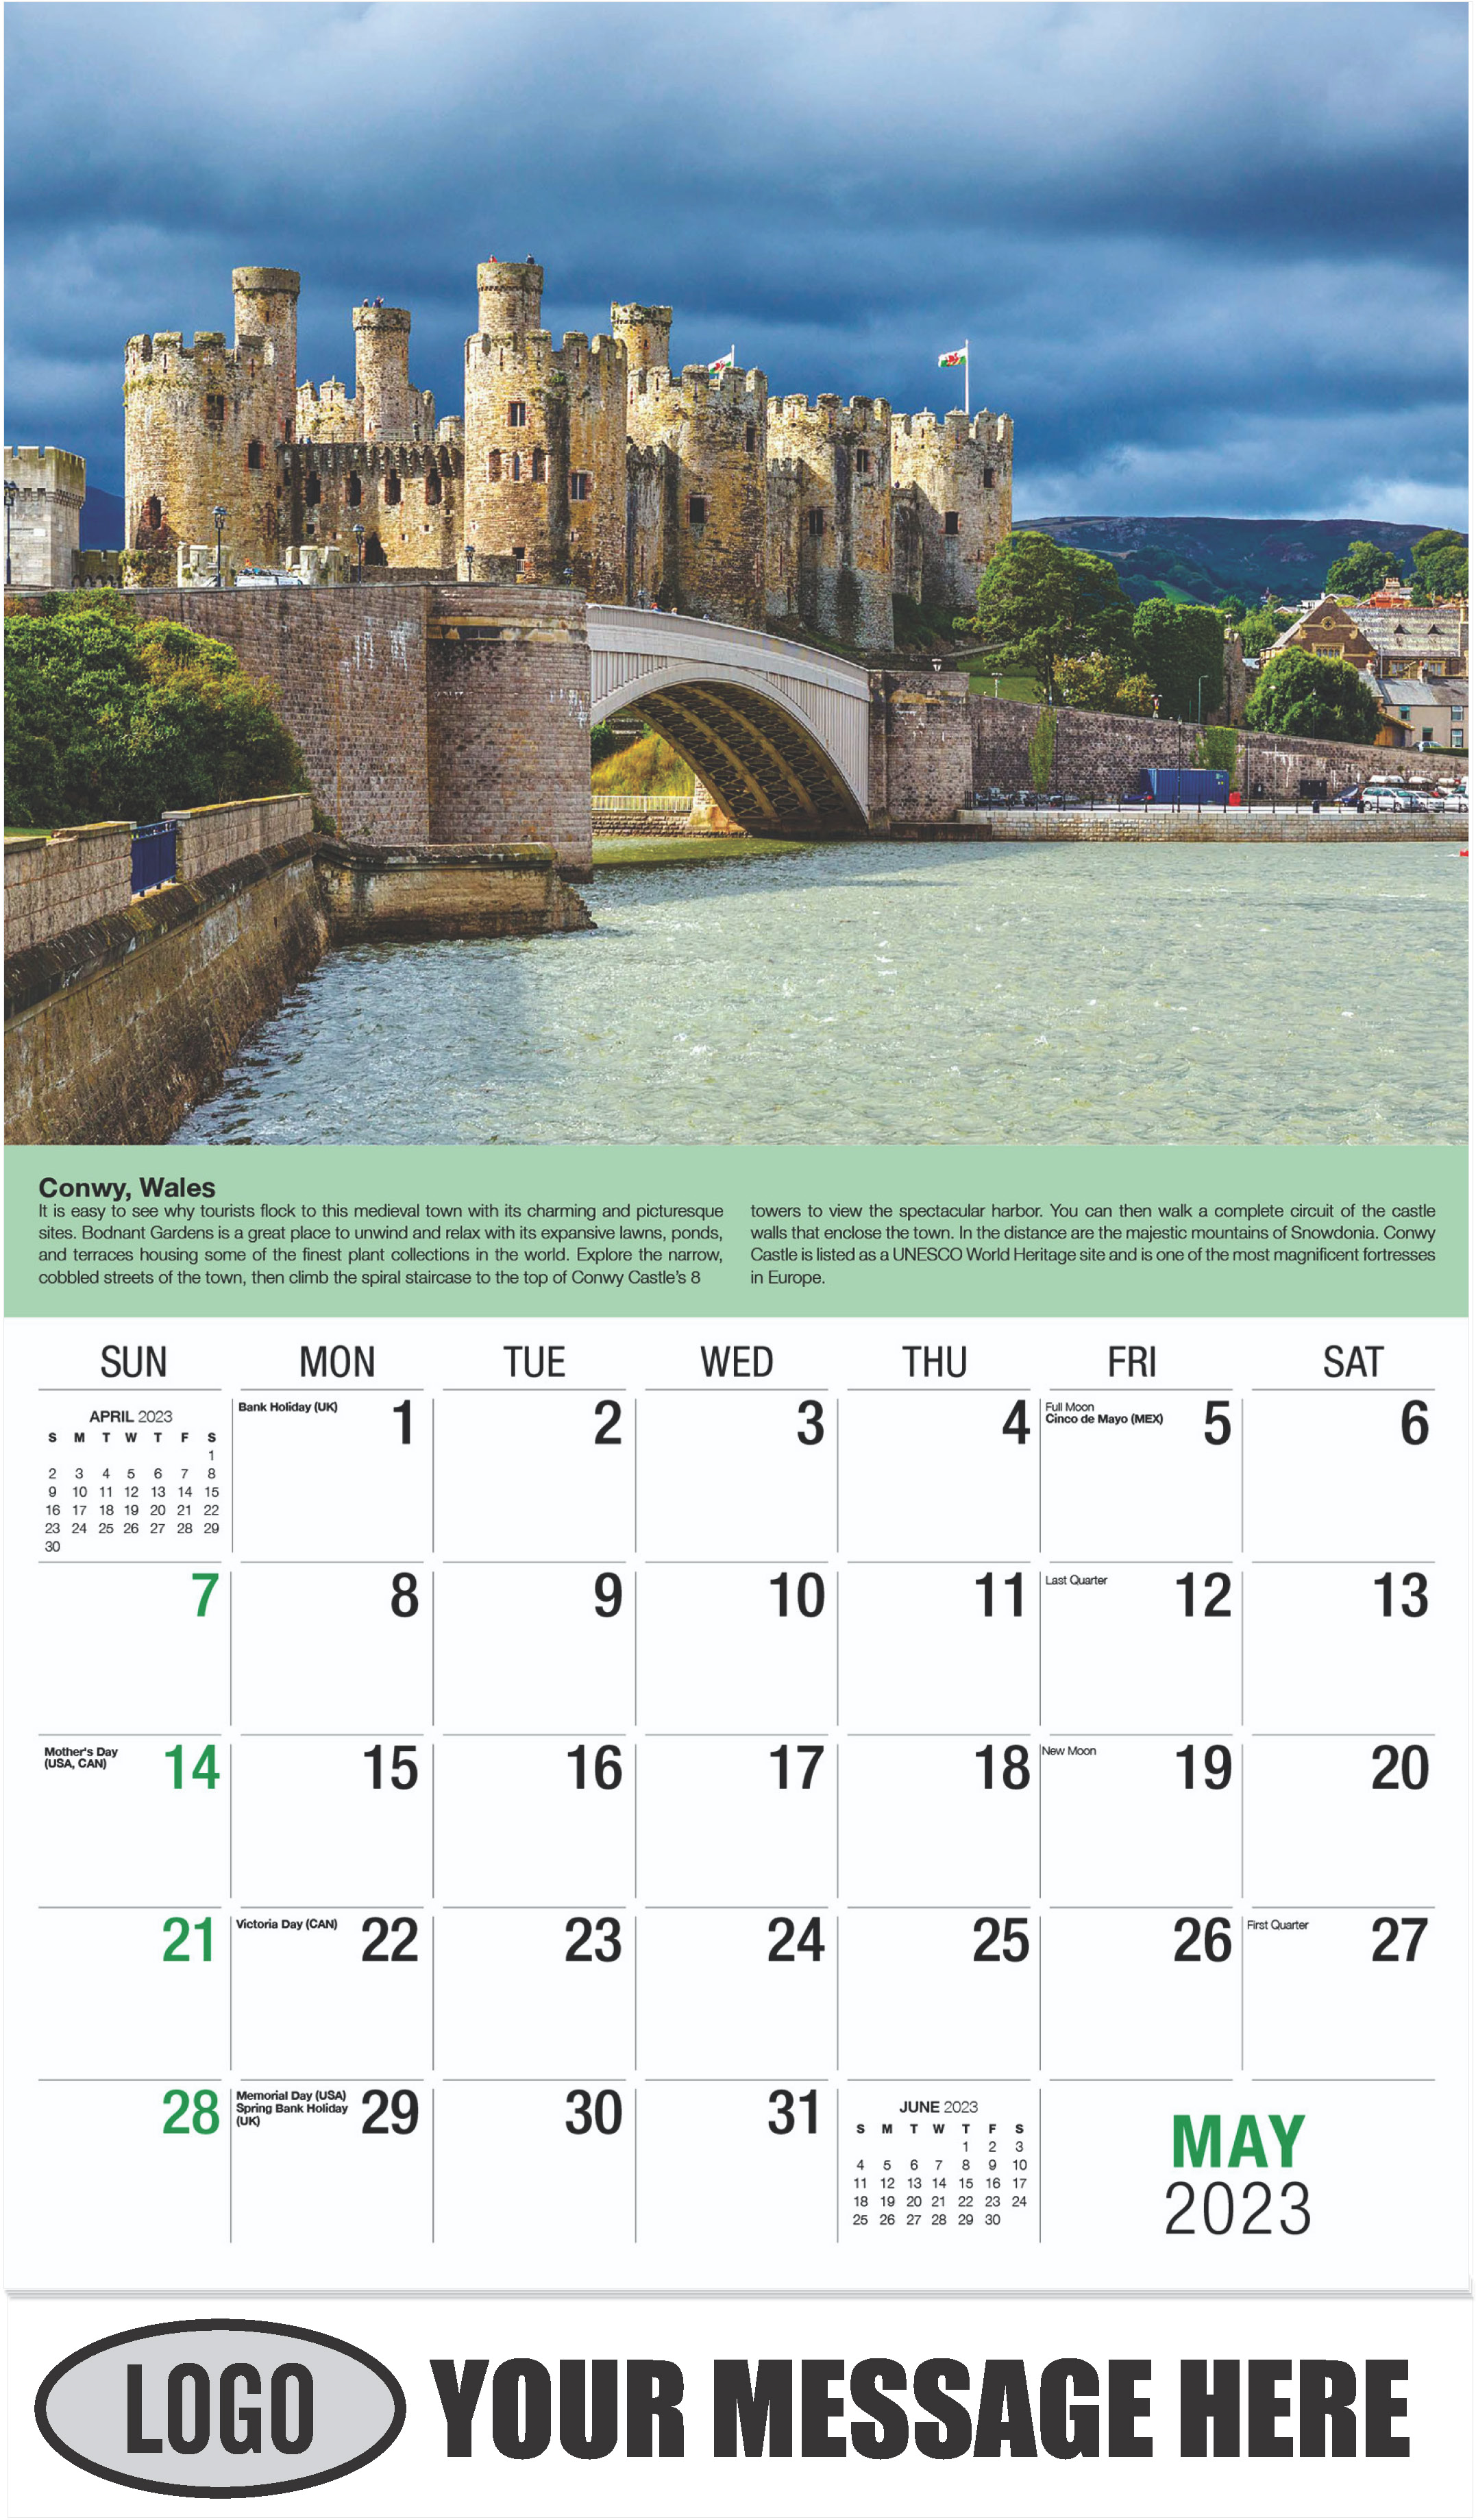 Conwy Castle and harbour, Conwy, North Wales - May - World Travel 2023 Promotional Calendar